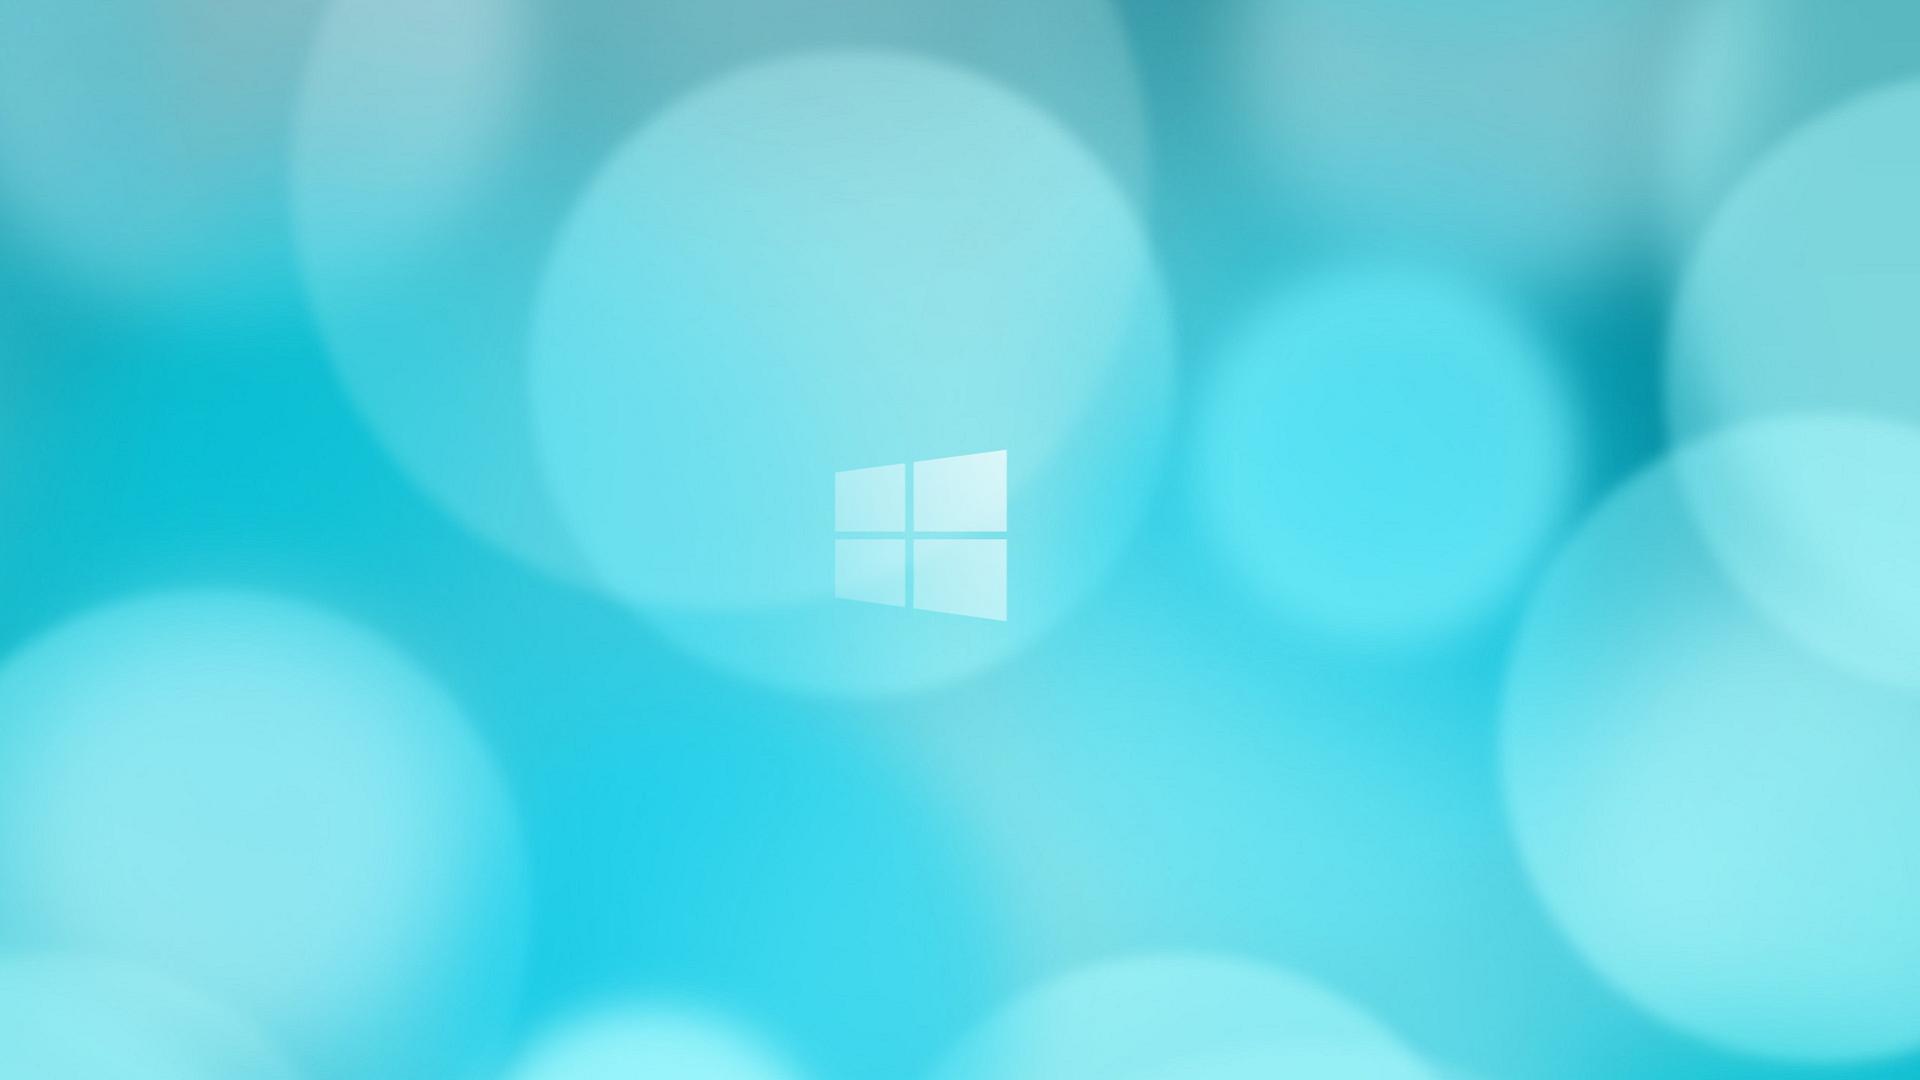 Cool windows backgrounds